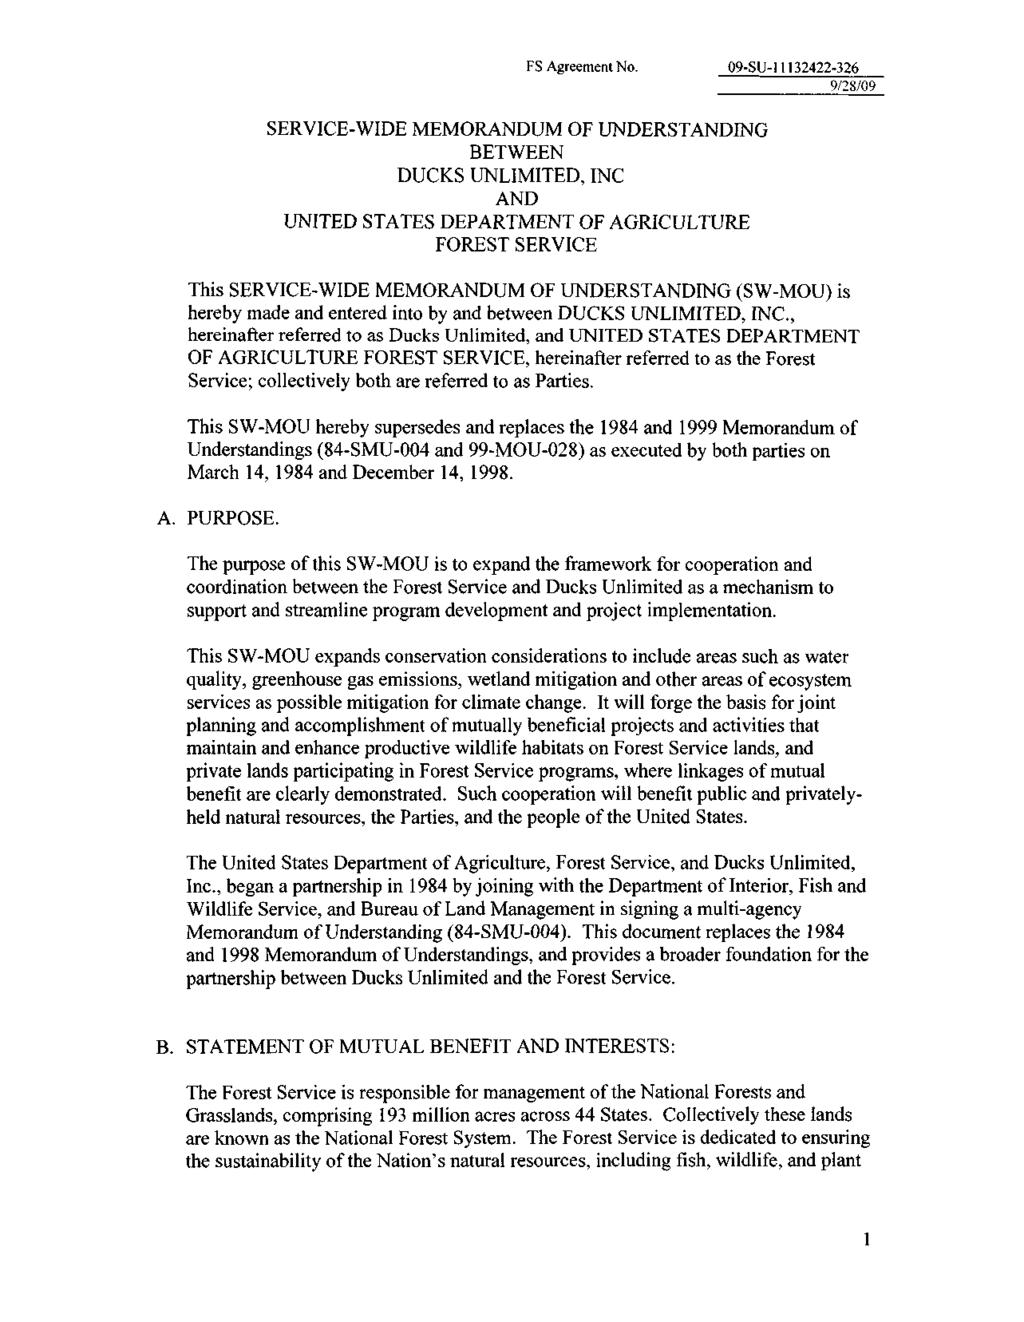 SERVICE-WIDE MEMORANDUM OF UNDERSTANDING BETWEEN DUCKS UNLIMITED, INC AND UNITED STATES DEPARTMENT OF AGRICULTURE FOREST SERVICE This SERVICE-WIDE MEMORANDUM OF UNDERSTANDING (SW-MOU) is hereby made